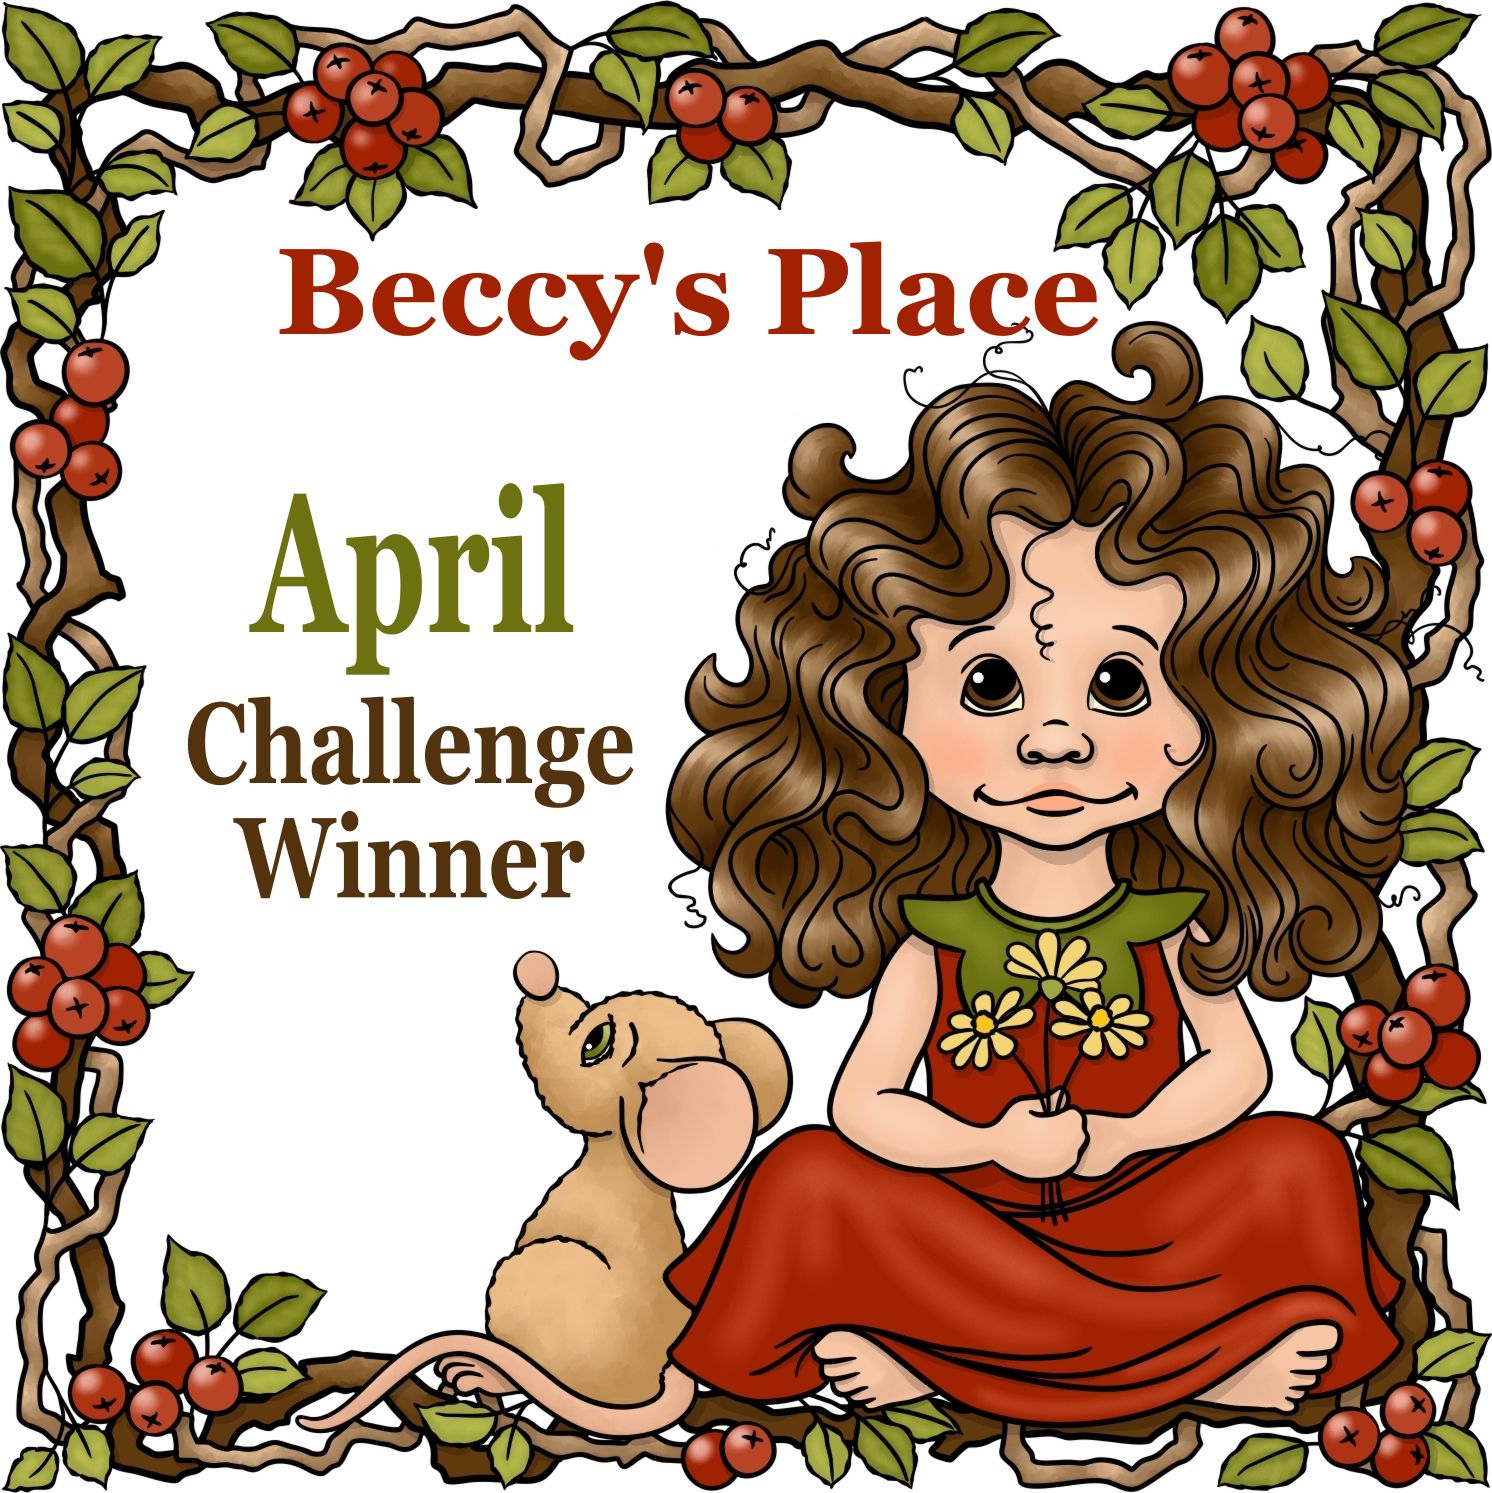 April Challenge Winner at Beccy's Place